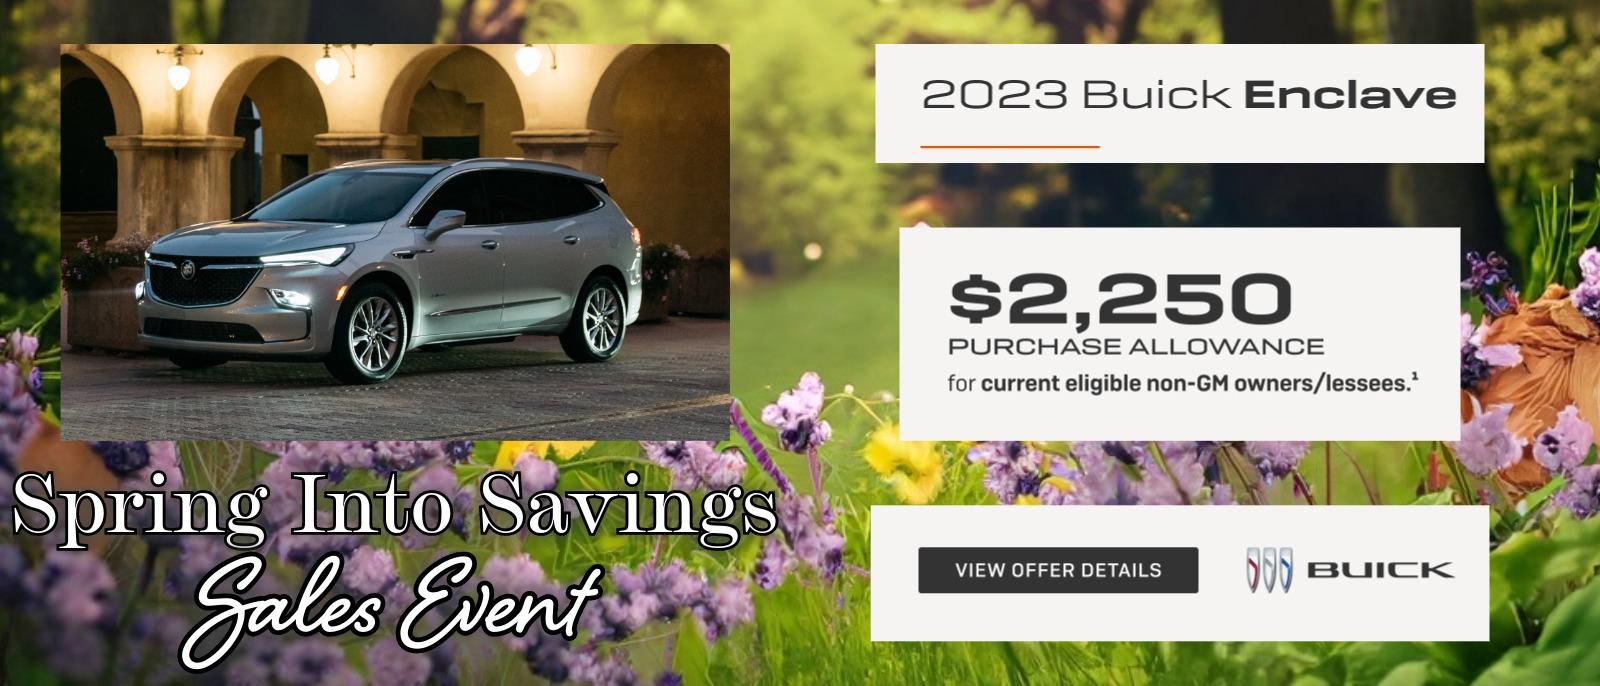 Spring Into Savings Sales Event Buick Enclave Slide